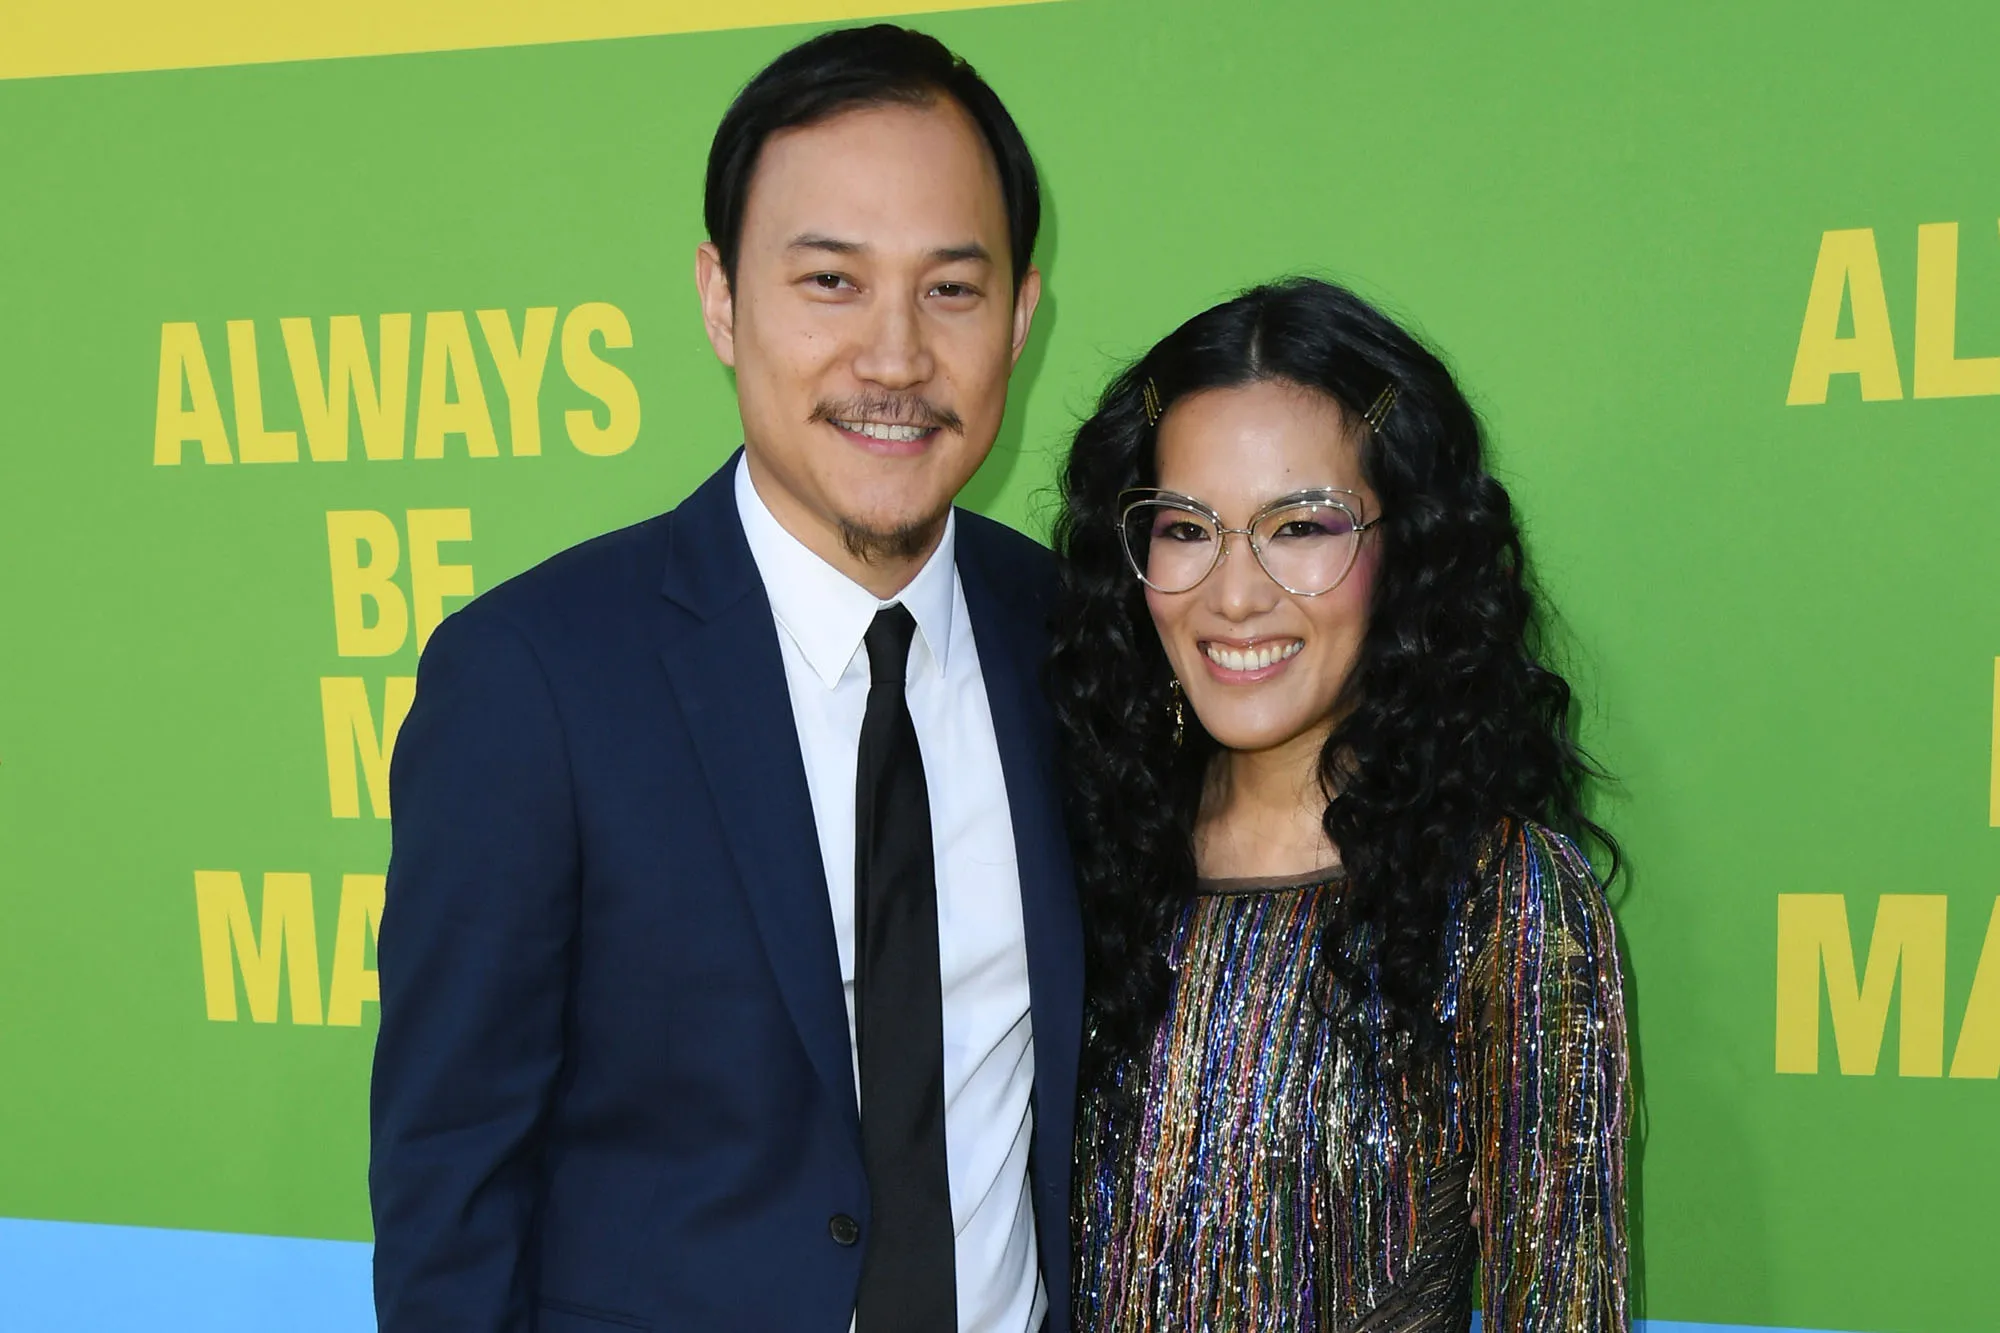 Ali Wong Officially Files For Divorce From Husband Justin Hakuta